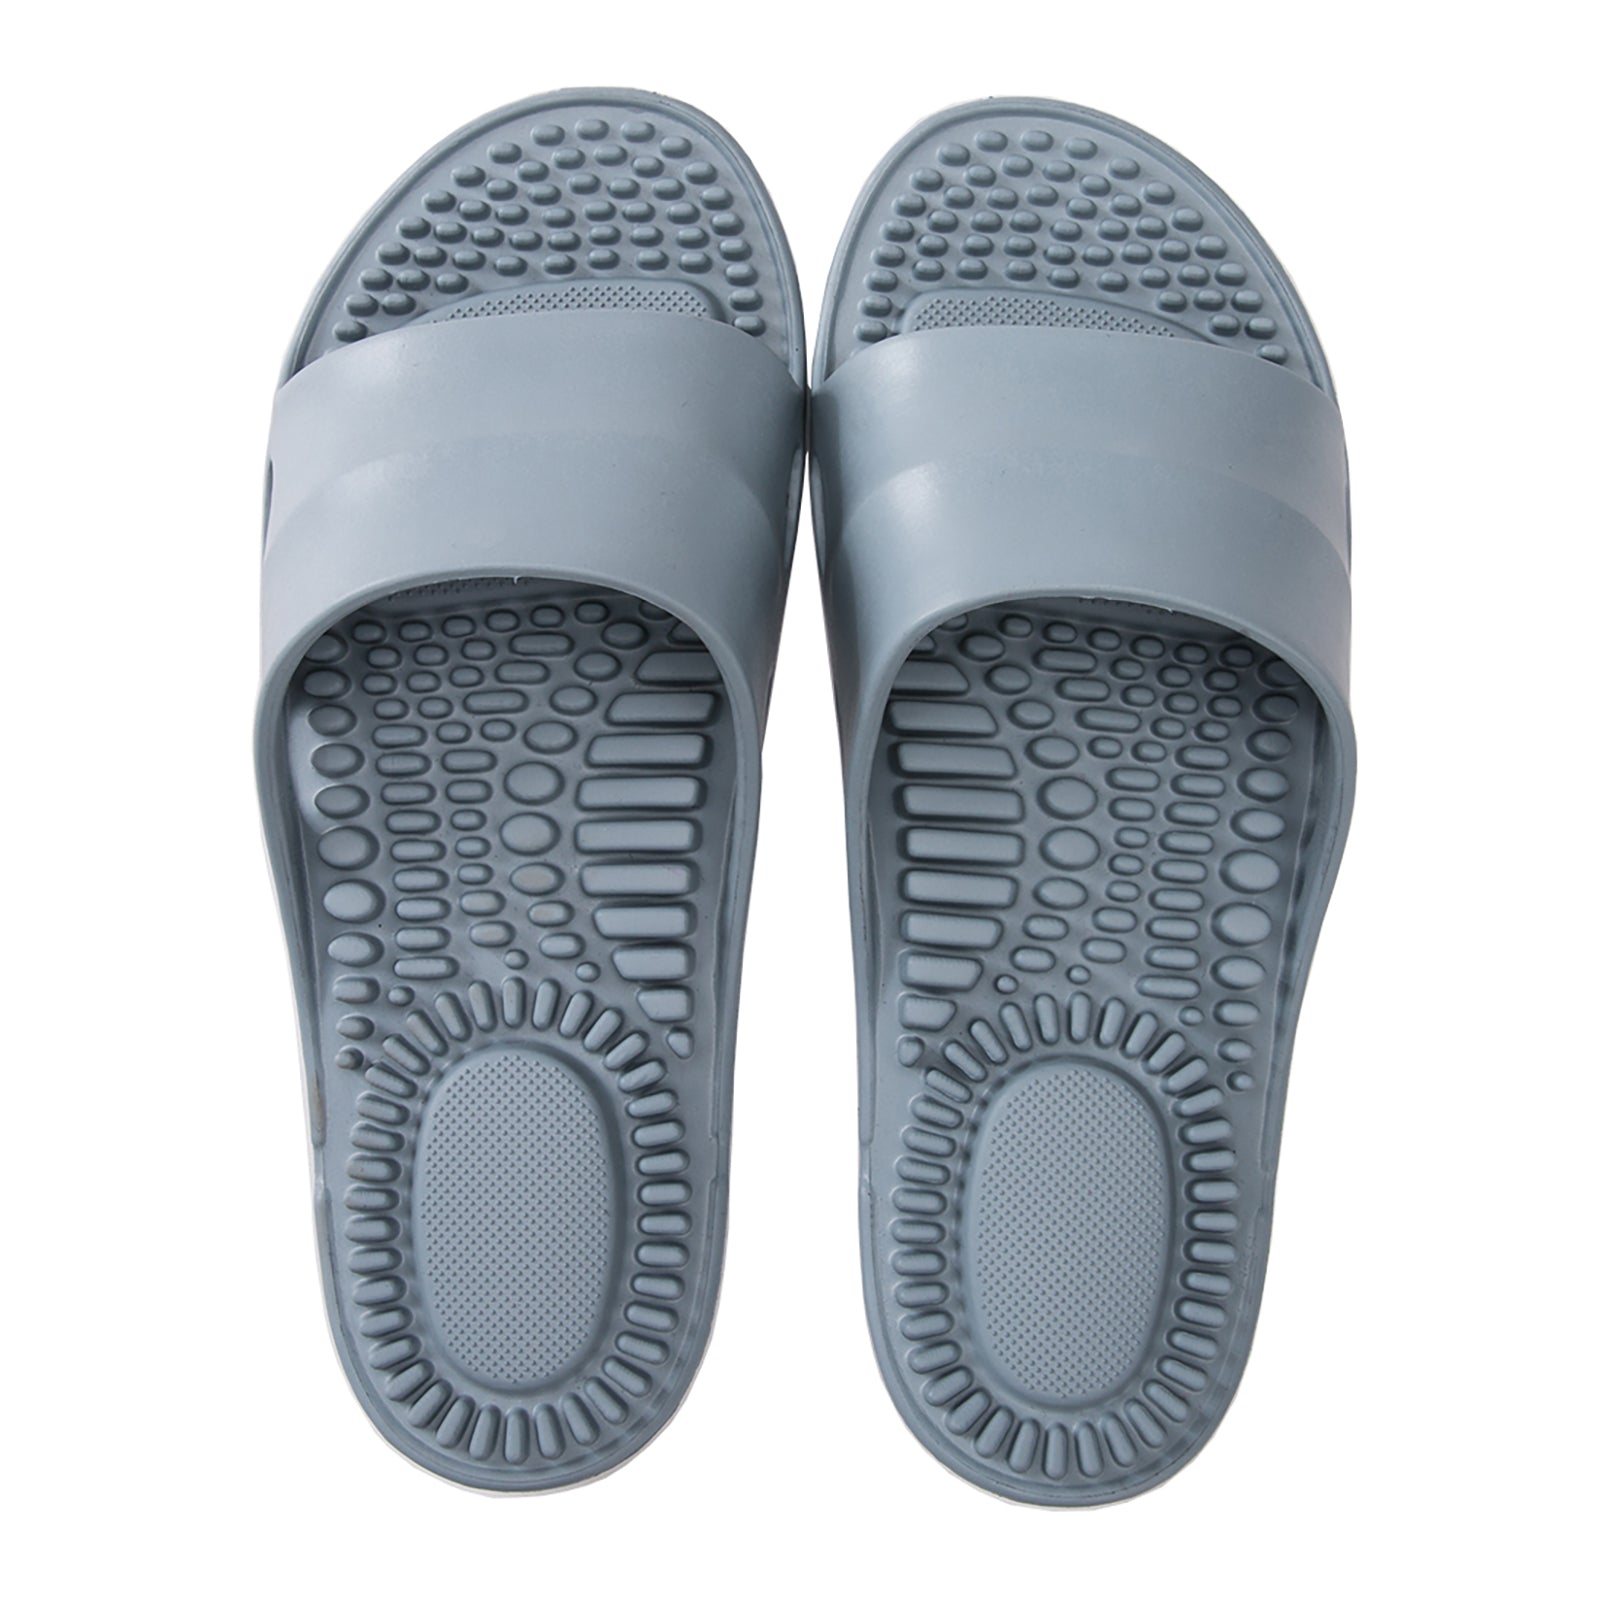 AOKADUTE Shower Slippers With Drainage Holes Quick Drying for India | Ubuy